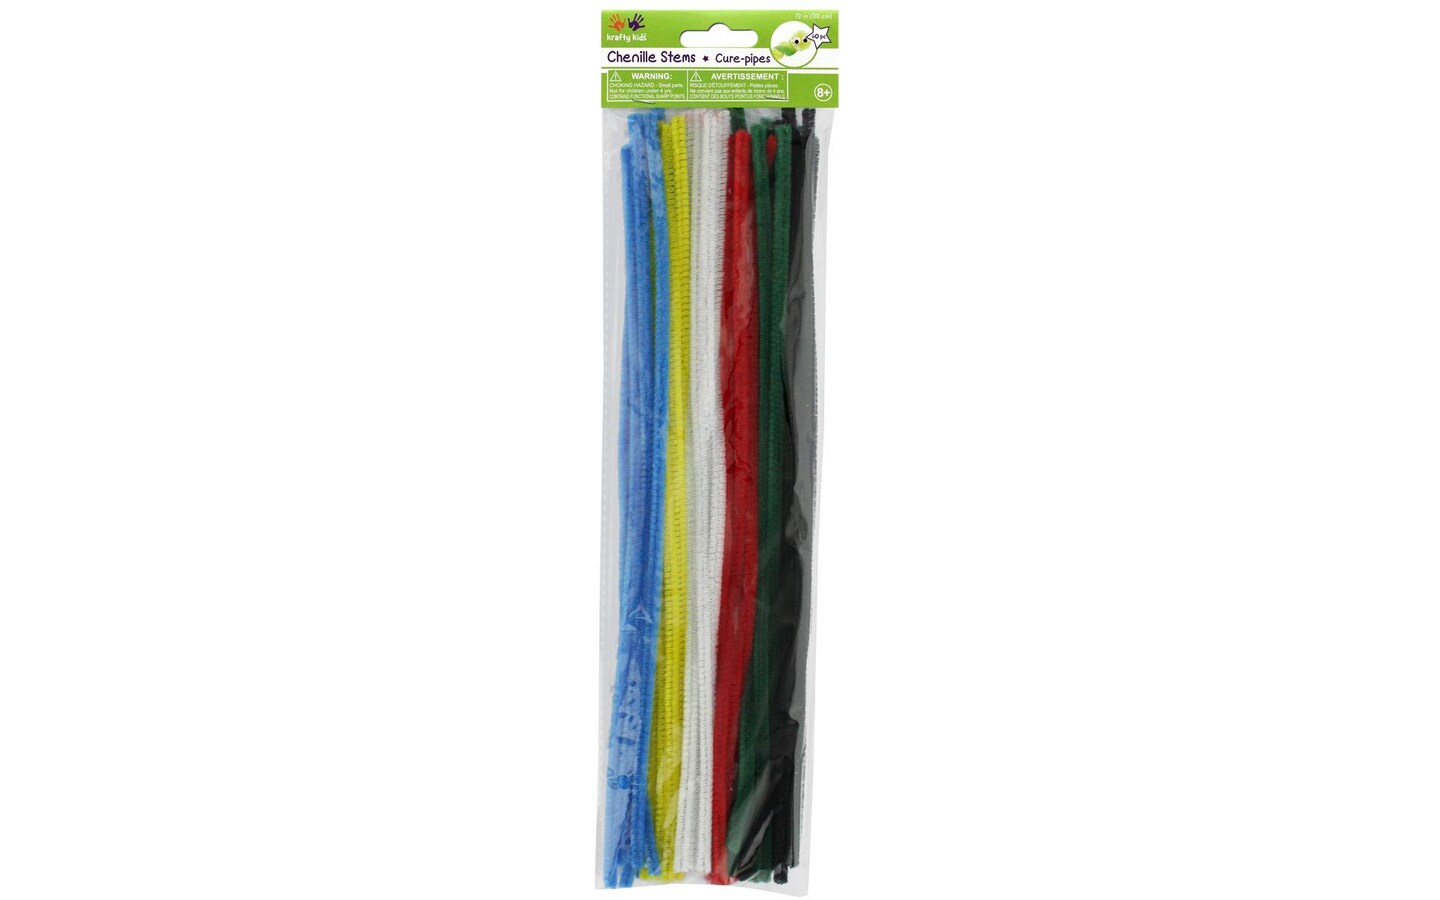 Crafter's Square Chenille Stems, 45-ct. Packs